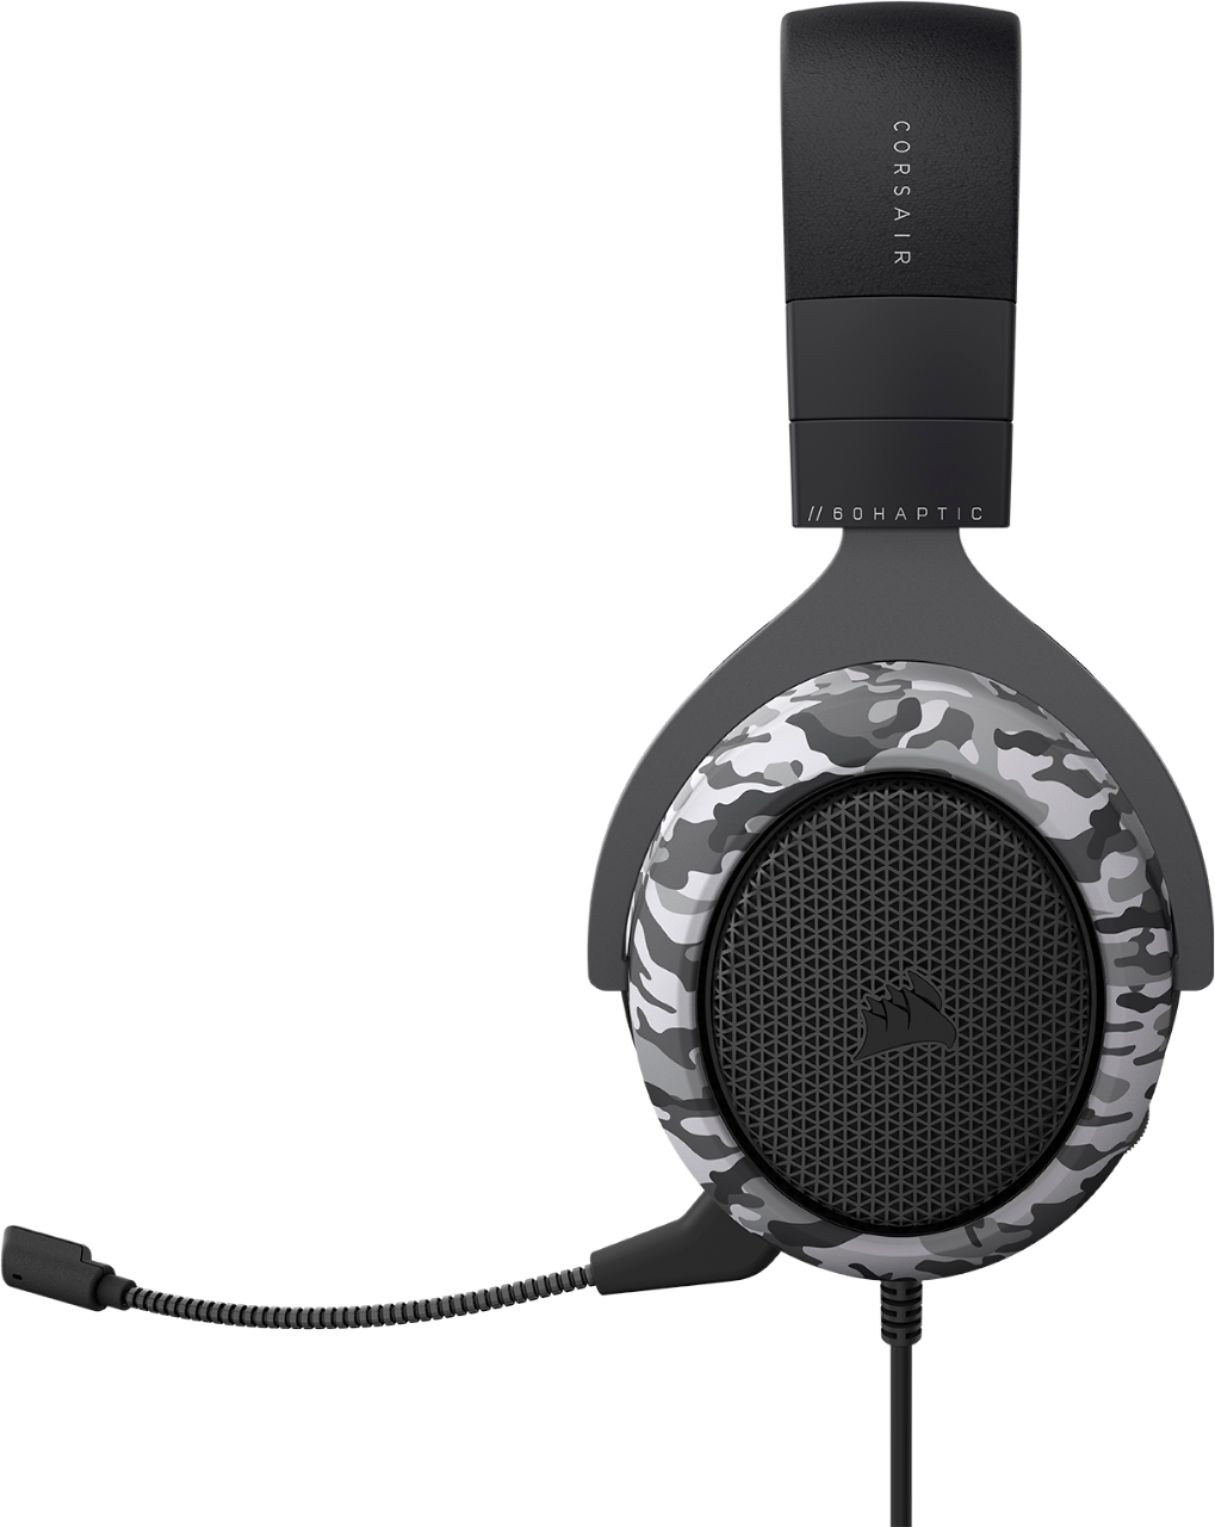 Best Buy: CORSAIR HS60 HAPTIC Stereo Gaming Headset for PC with 